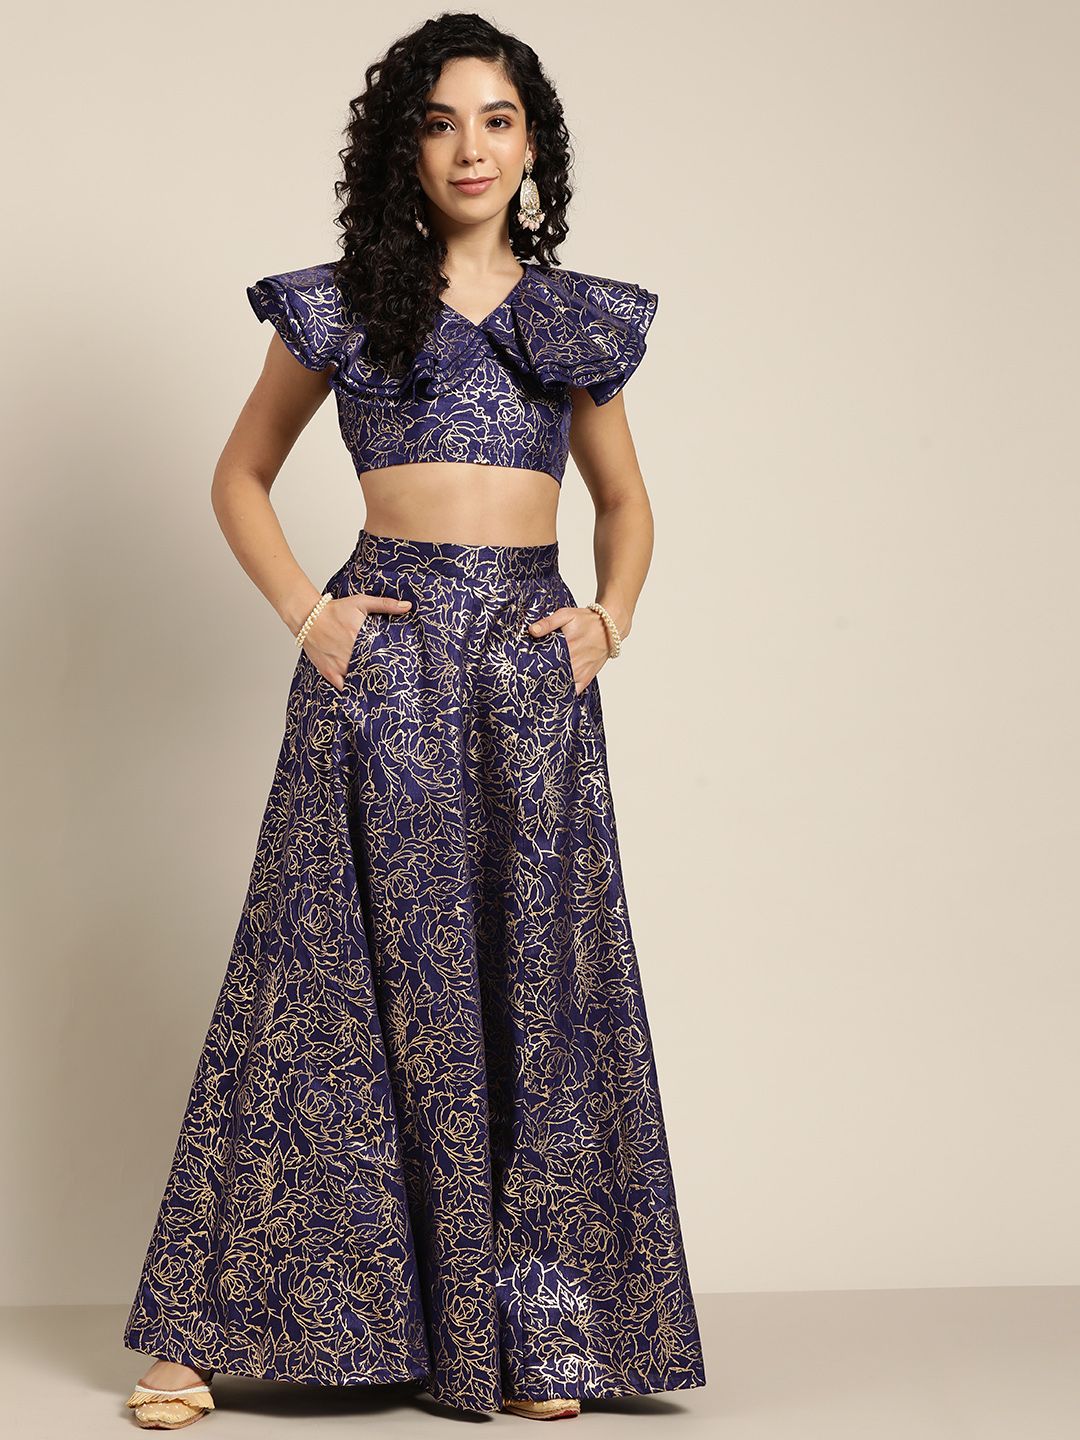 Shae by SASSAFRAS Navy Blue & Golden Printed Foil Crop Top With Anarkali Skirt Price in India